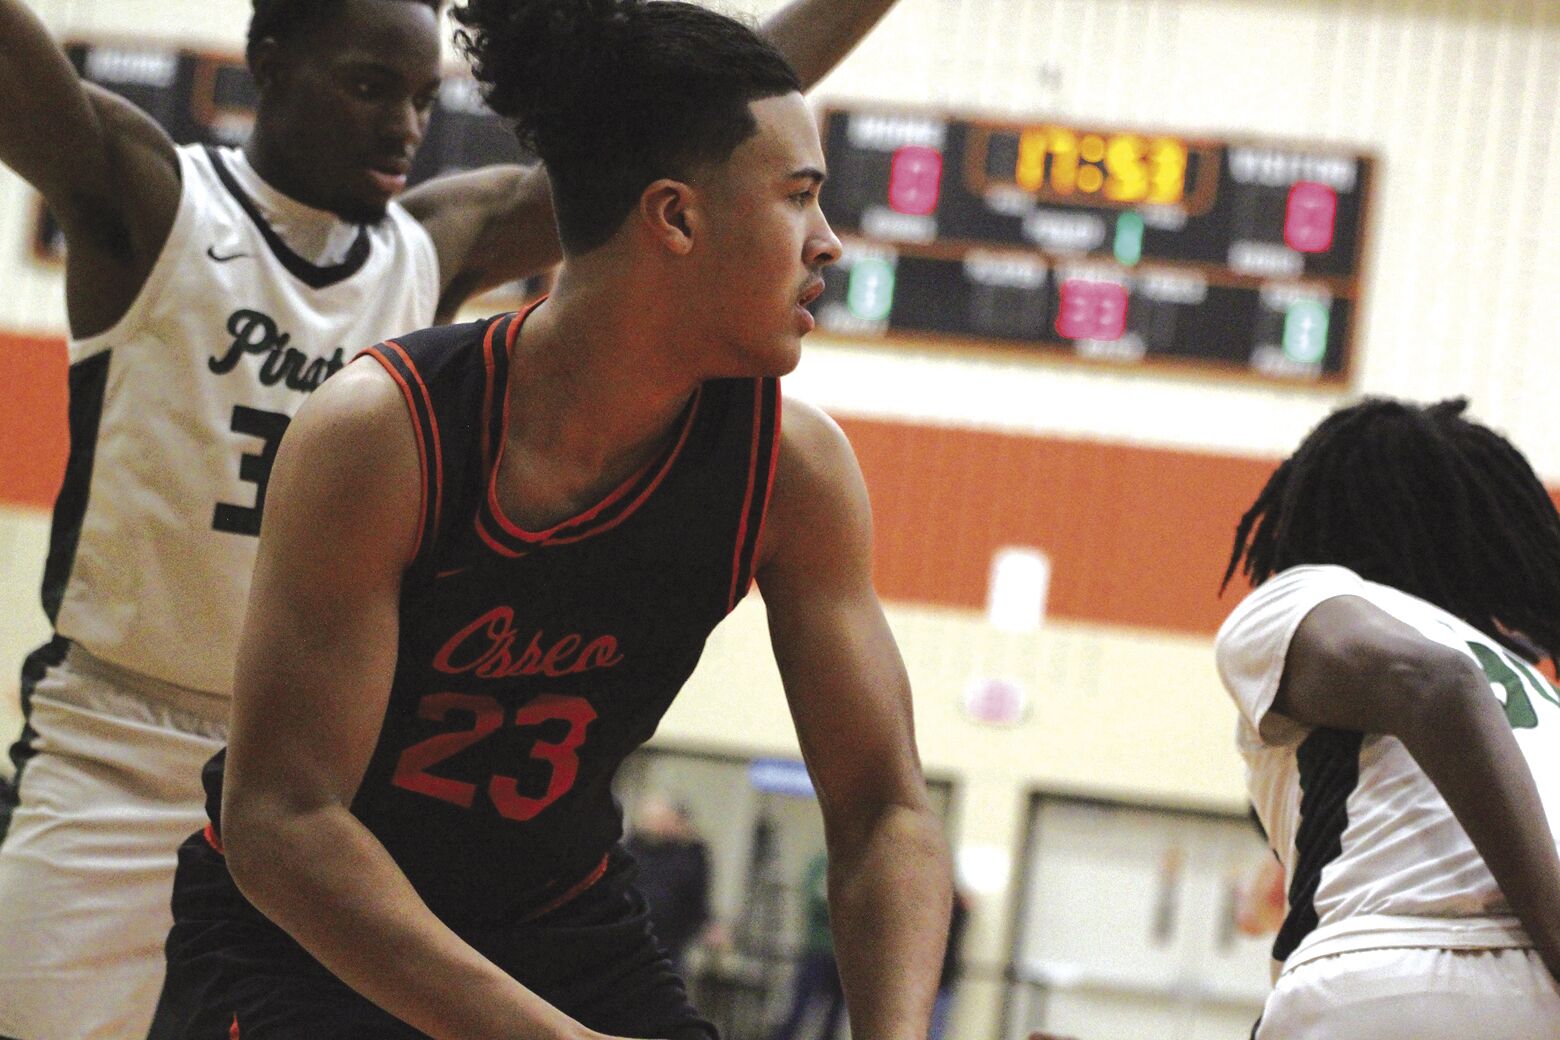 Osseo Boys and Girls Basketball Teams Struggle in Recent Matches